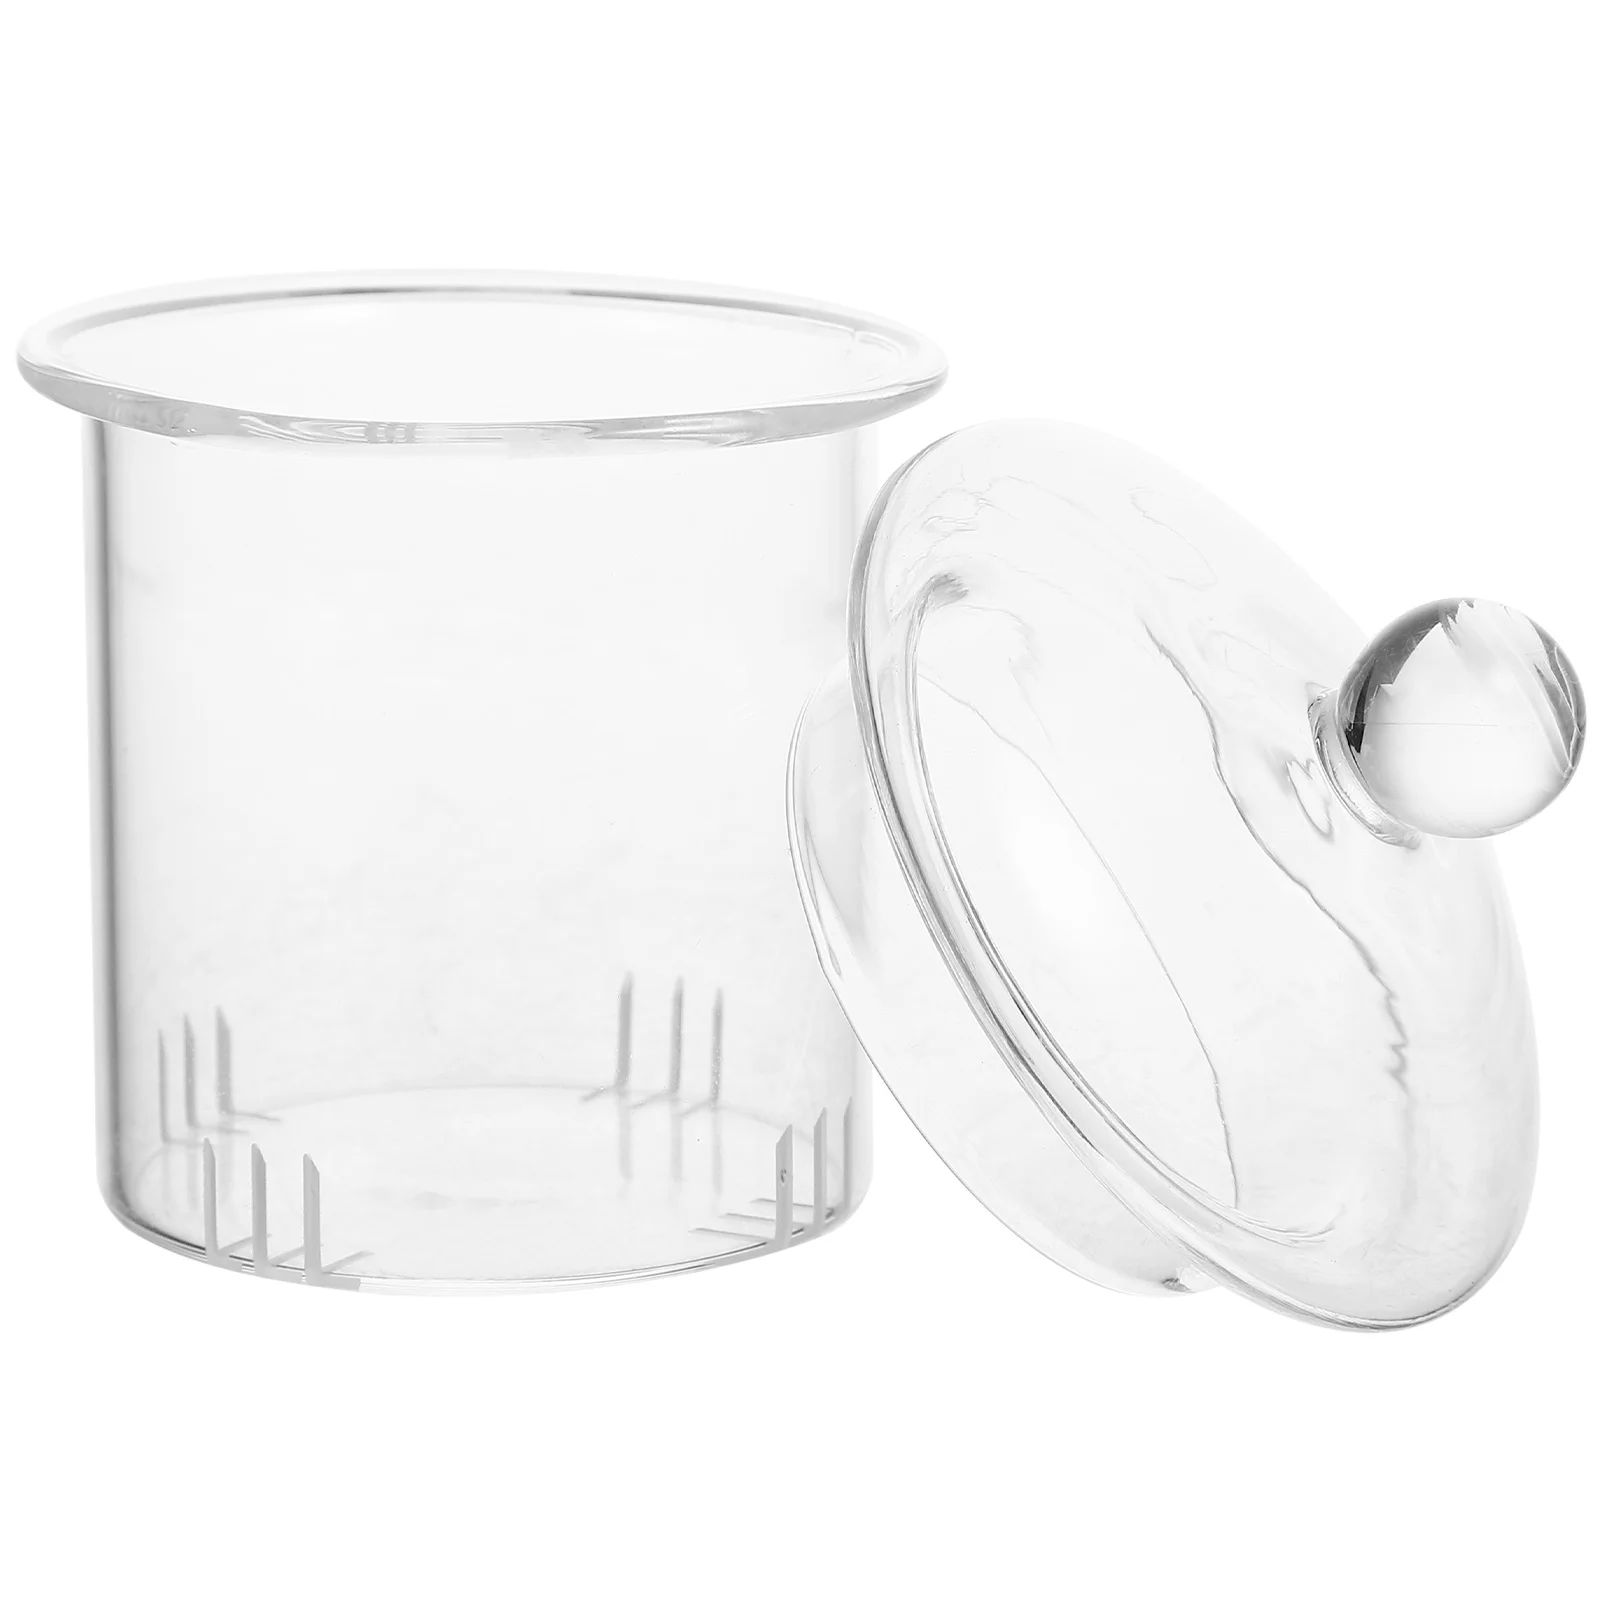 

Tea Strainer Infuserfilterloose Colanders Strainers Teapot Leafsteeper Pot Lids Clear Filters Accessories Replacement Coffee